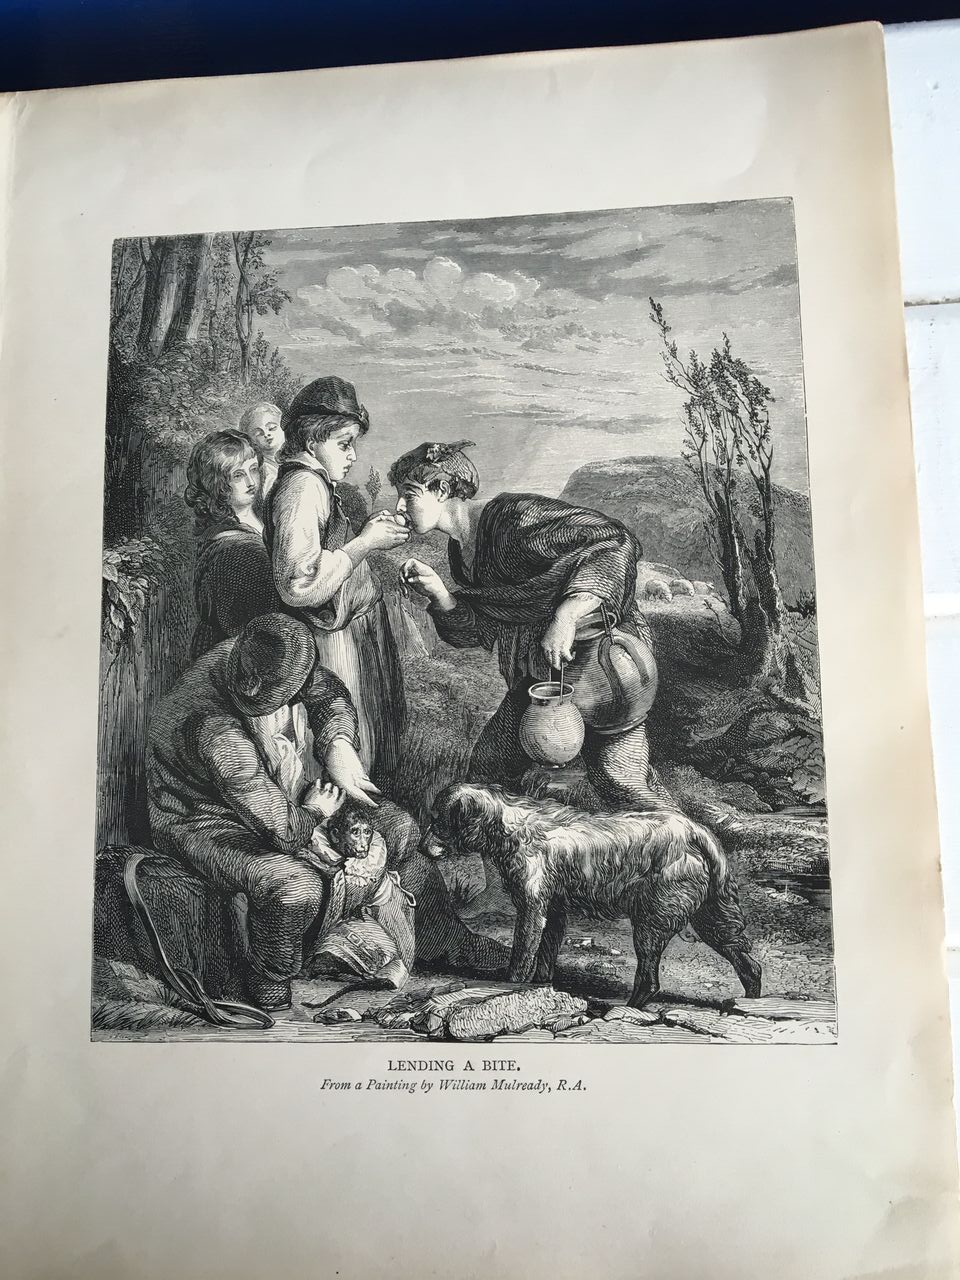 AN ENGRAVING c1900 OF A PAINTING BY WILLIAM MULREADY (1786 - 1863 ). "LENDING A BITE". Engraved on